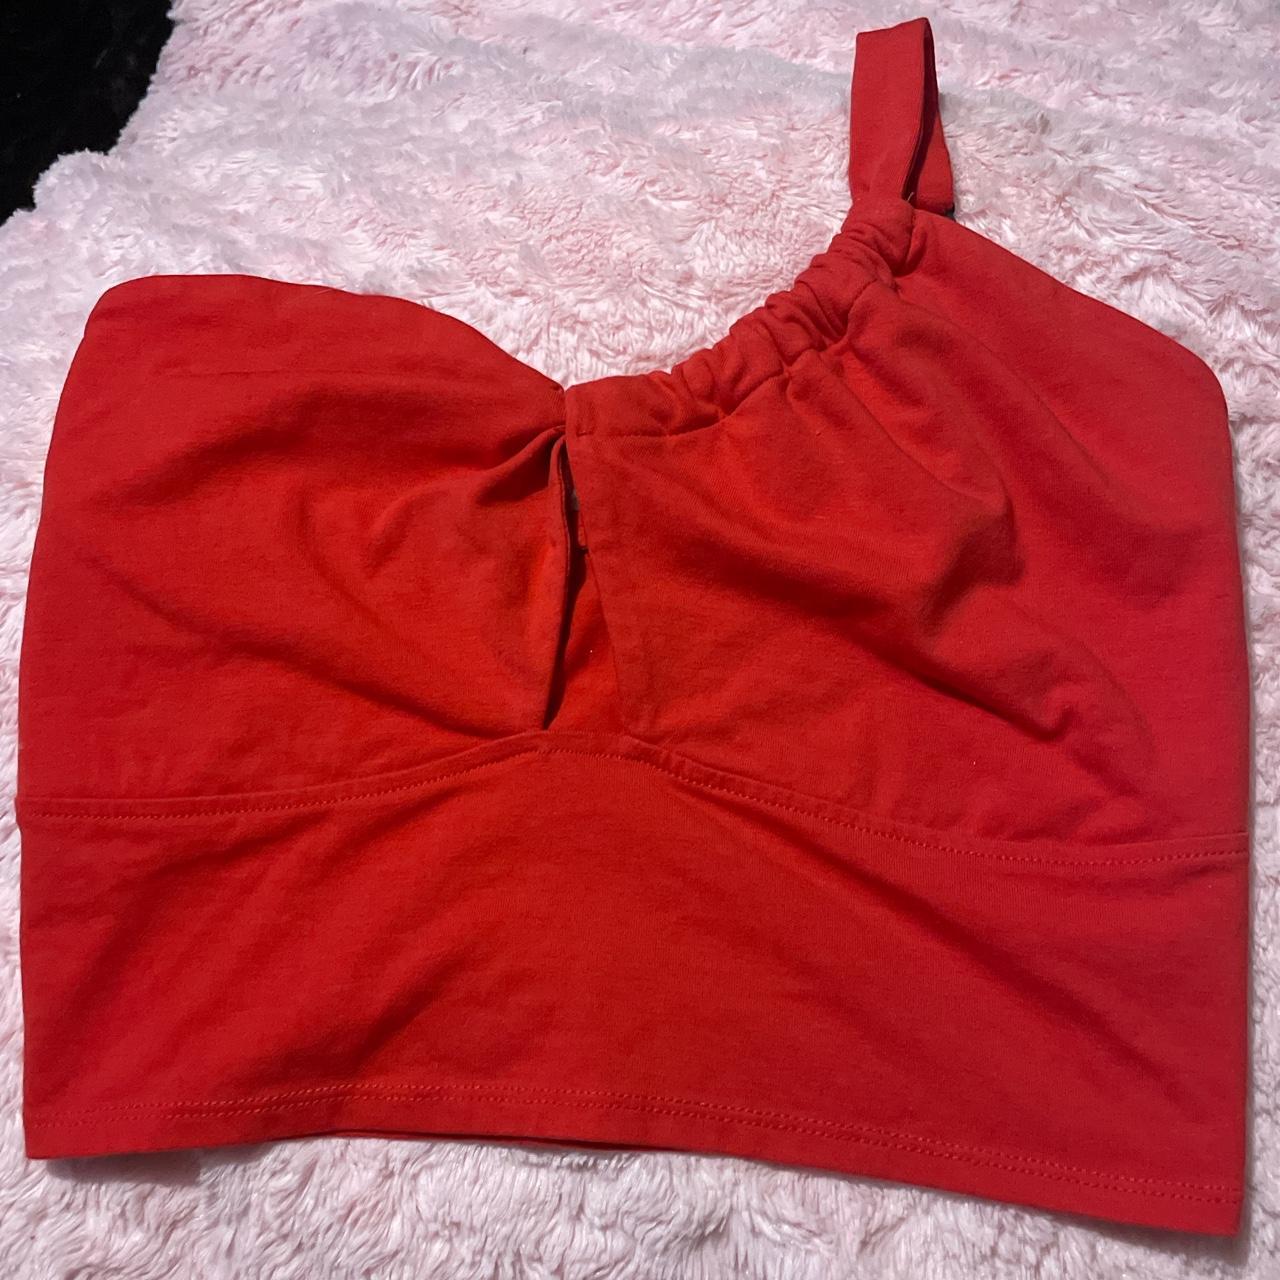 Cropped red wild fable sweatshirt. Worn once, - Depop